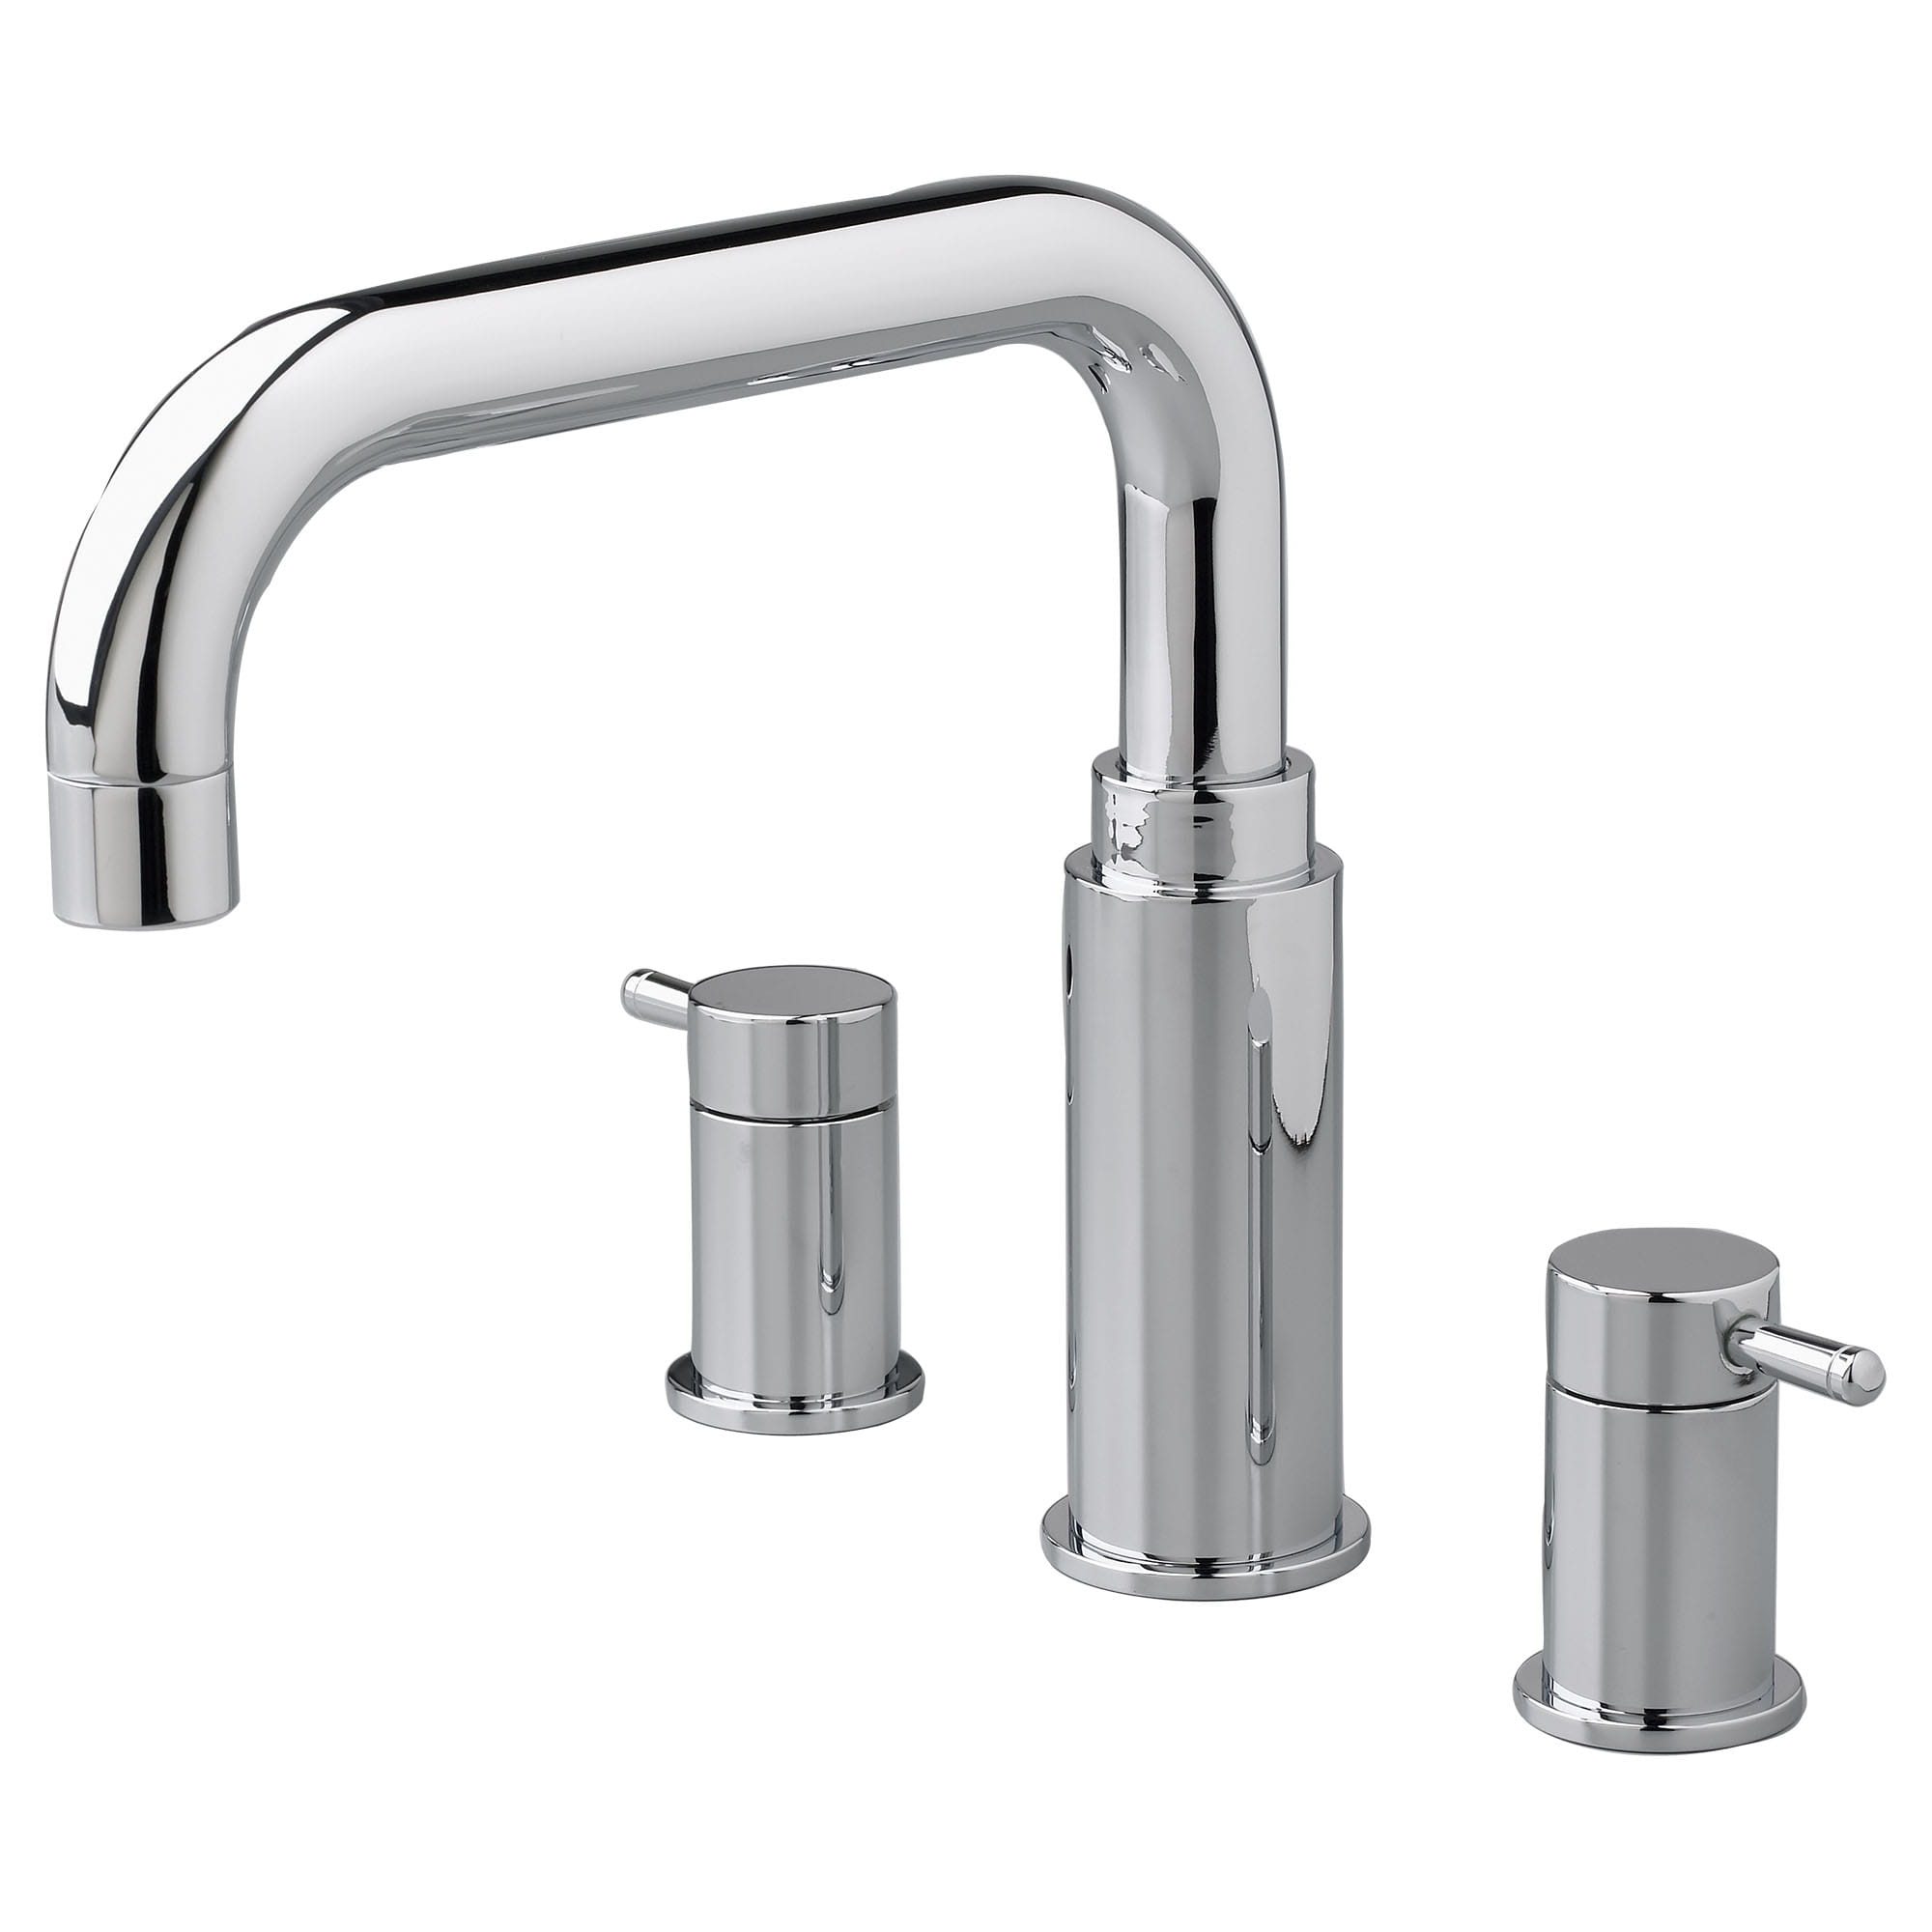 Serin Bathtub Faucet With Lever Handles for Flash Rough In Valve CHROME